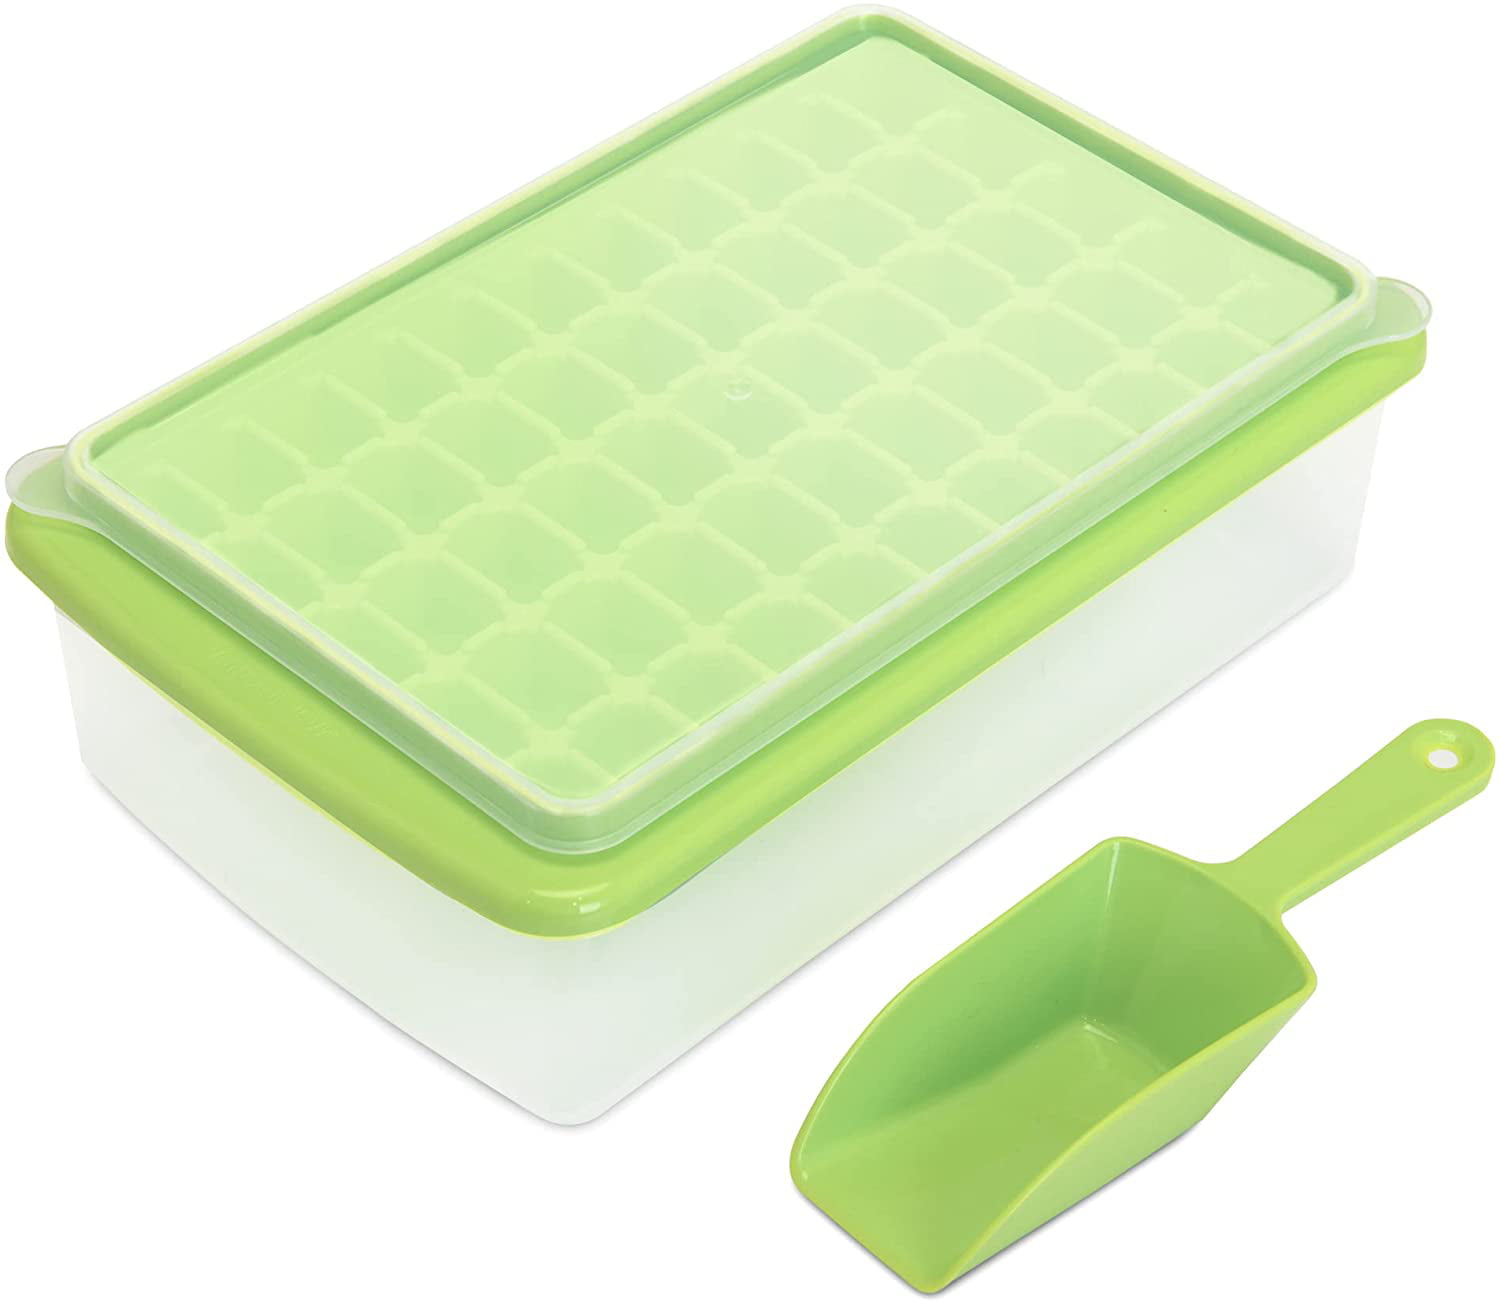 Flexible Safe Ice Cube Molds Comes with Ice Container CZWL&HG Ice Cube Tray With Lid and Bin|55 Nugget mini Ice Tray blue Scoop and Cover 